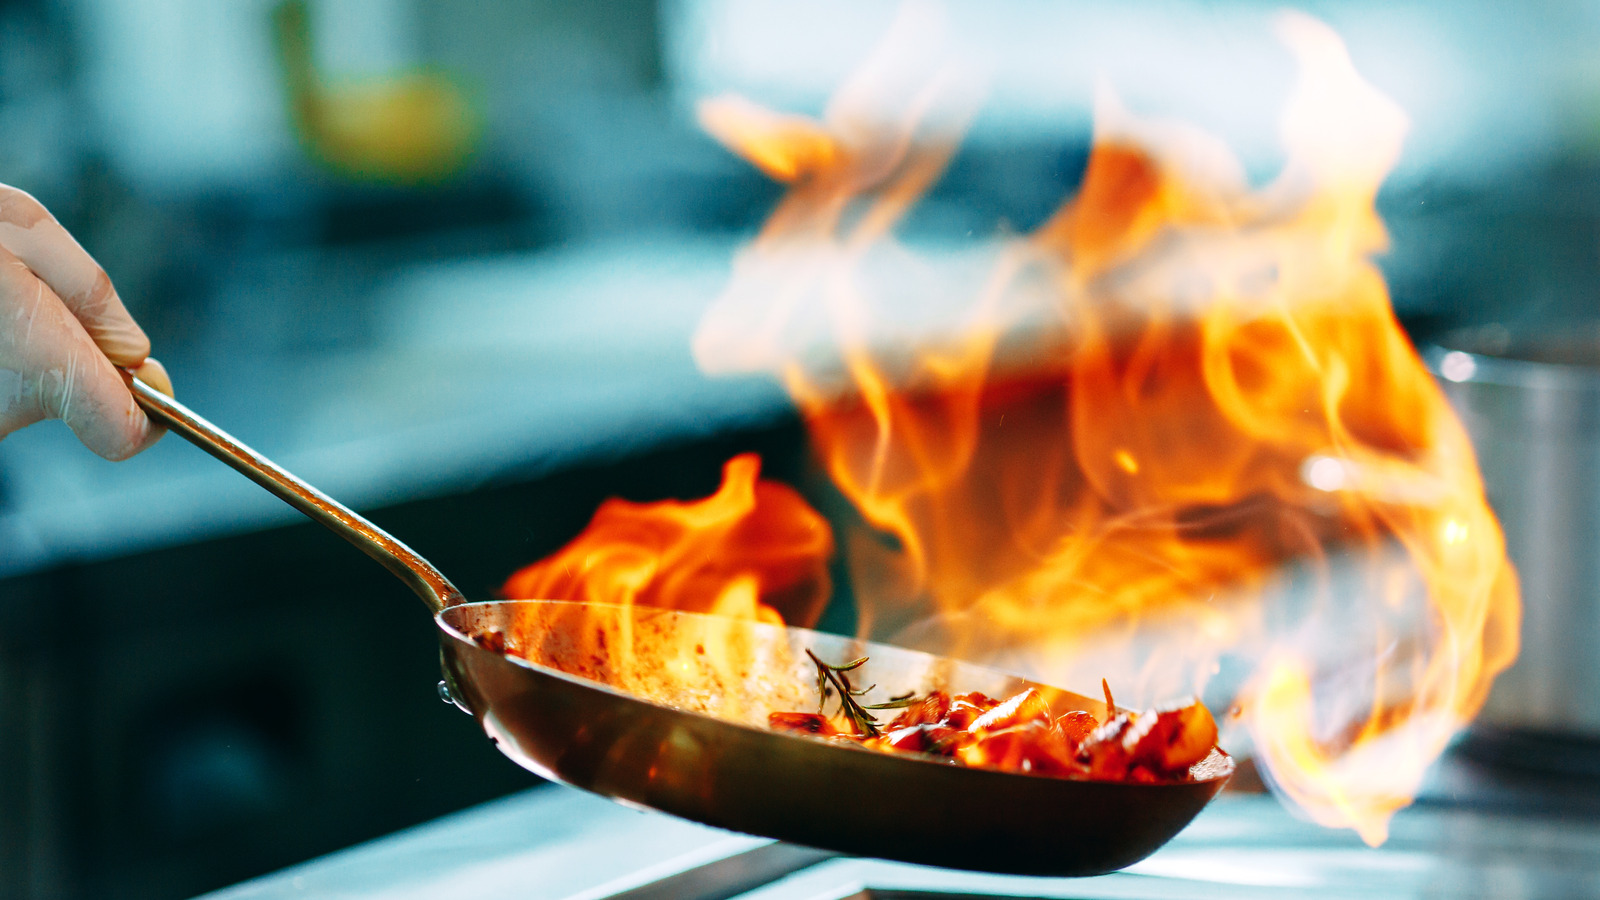 https://www.tastingtable.com/img/gallery/the-real-reason-restaurant-pans-sometimes-catch-on-fire/l-intro-1661539022.jpg